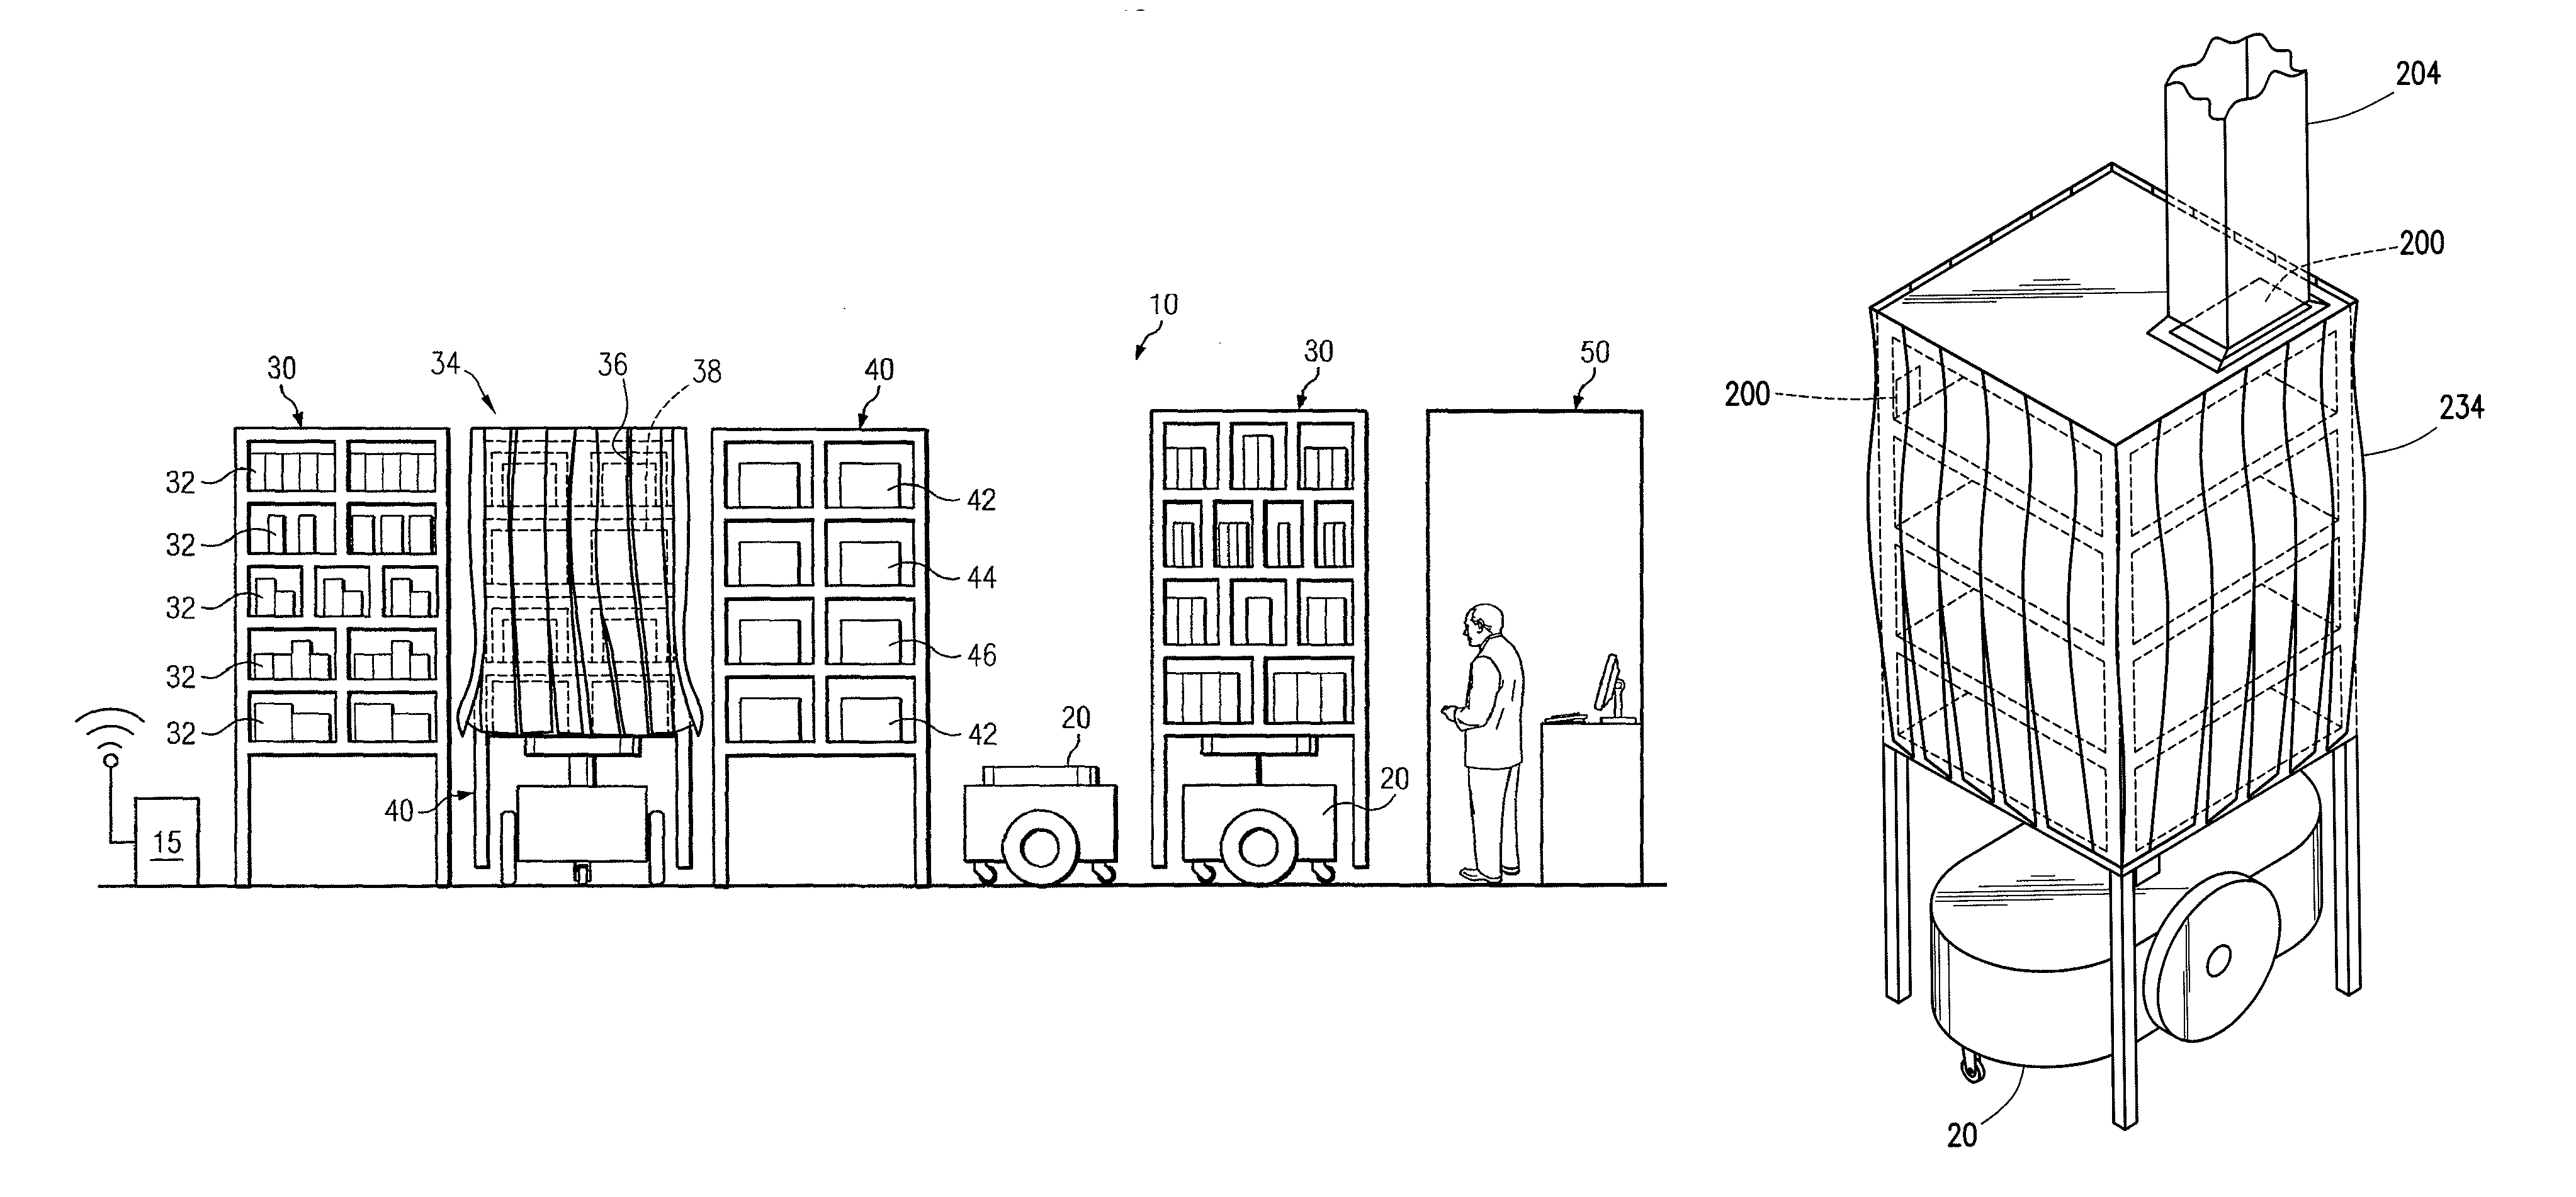 Inventory system with climate-controlled inventory